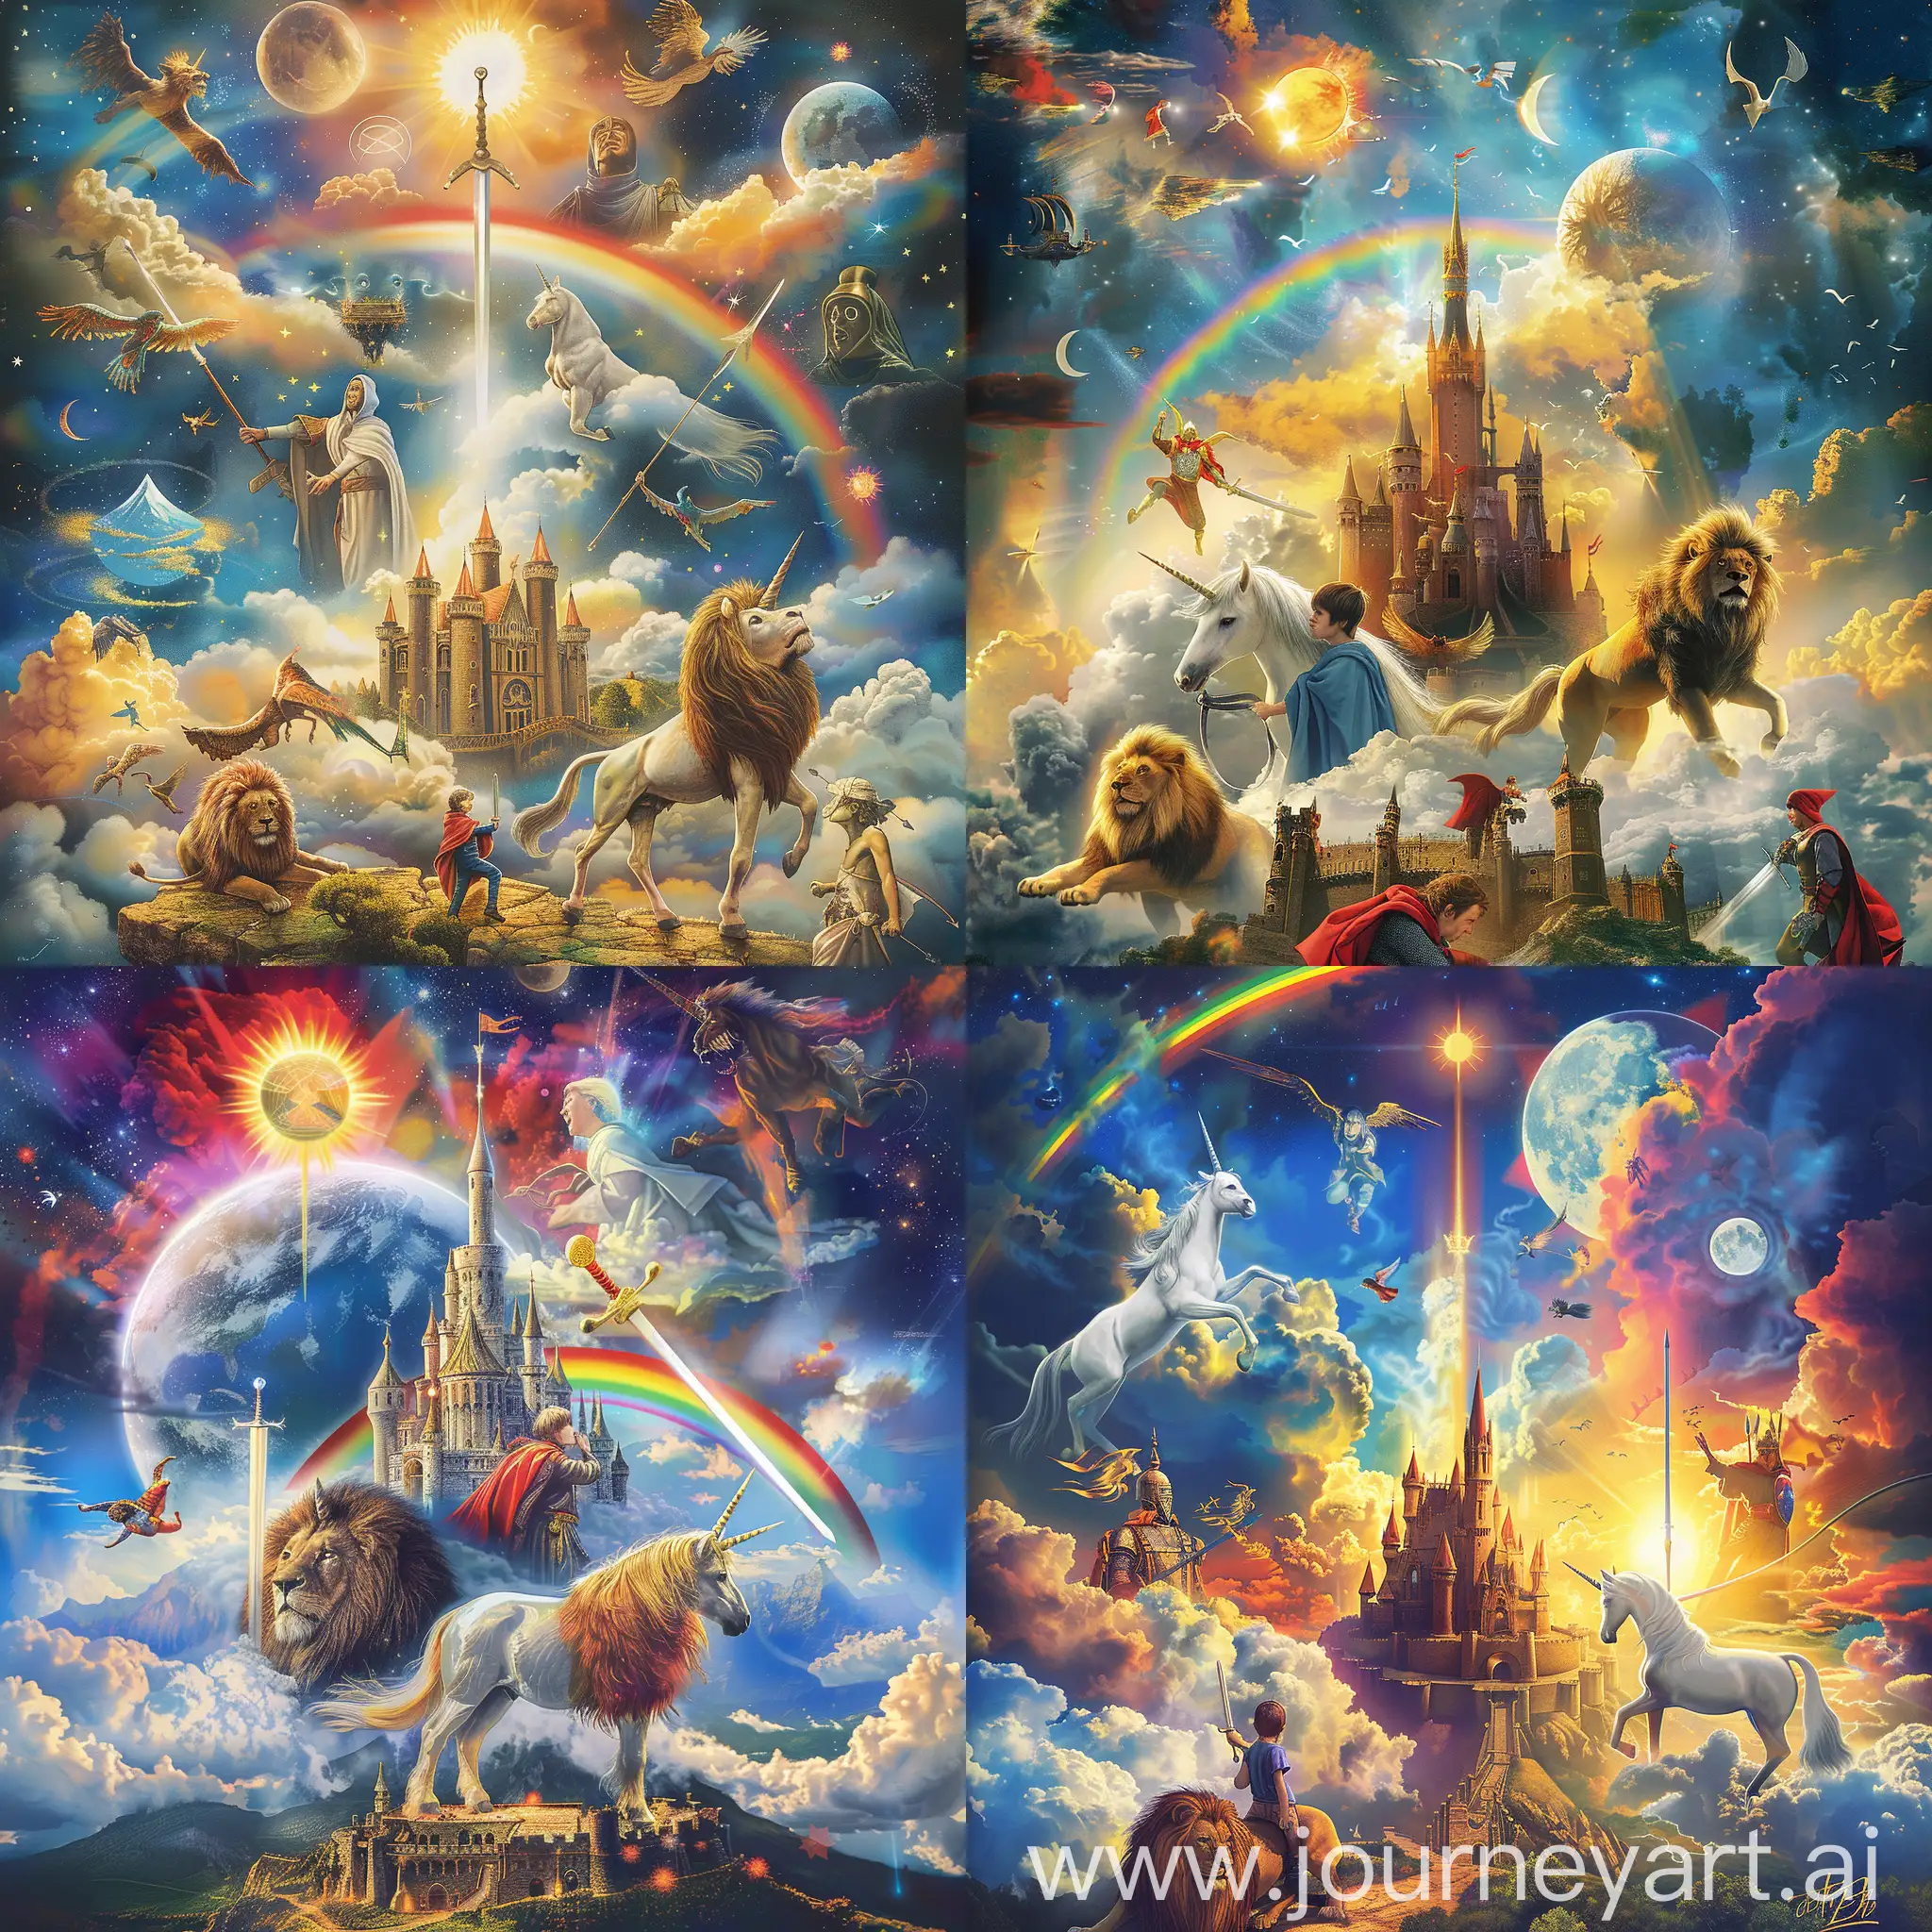 Characters movie poster castle in The sky, wizard, unicorn, lion, boy superhero, clouds, two moons, a sun, sword, middle earth fantasy rainbow, spiritual and our t of body experience monk 